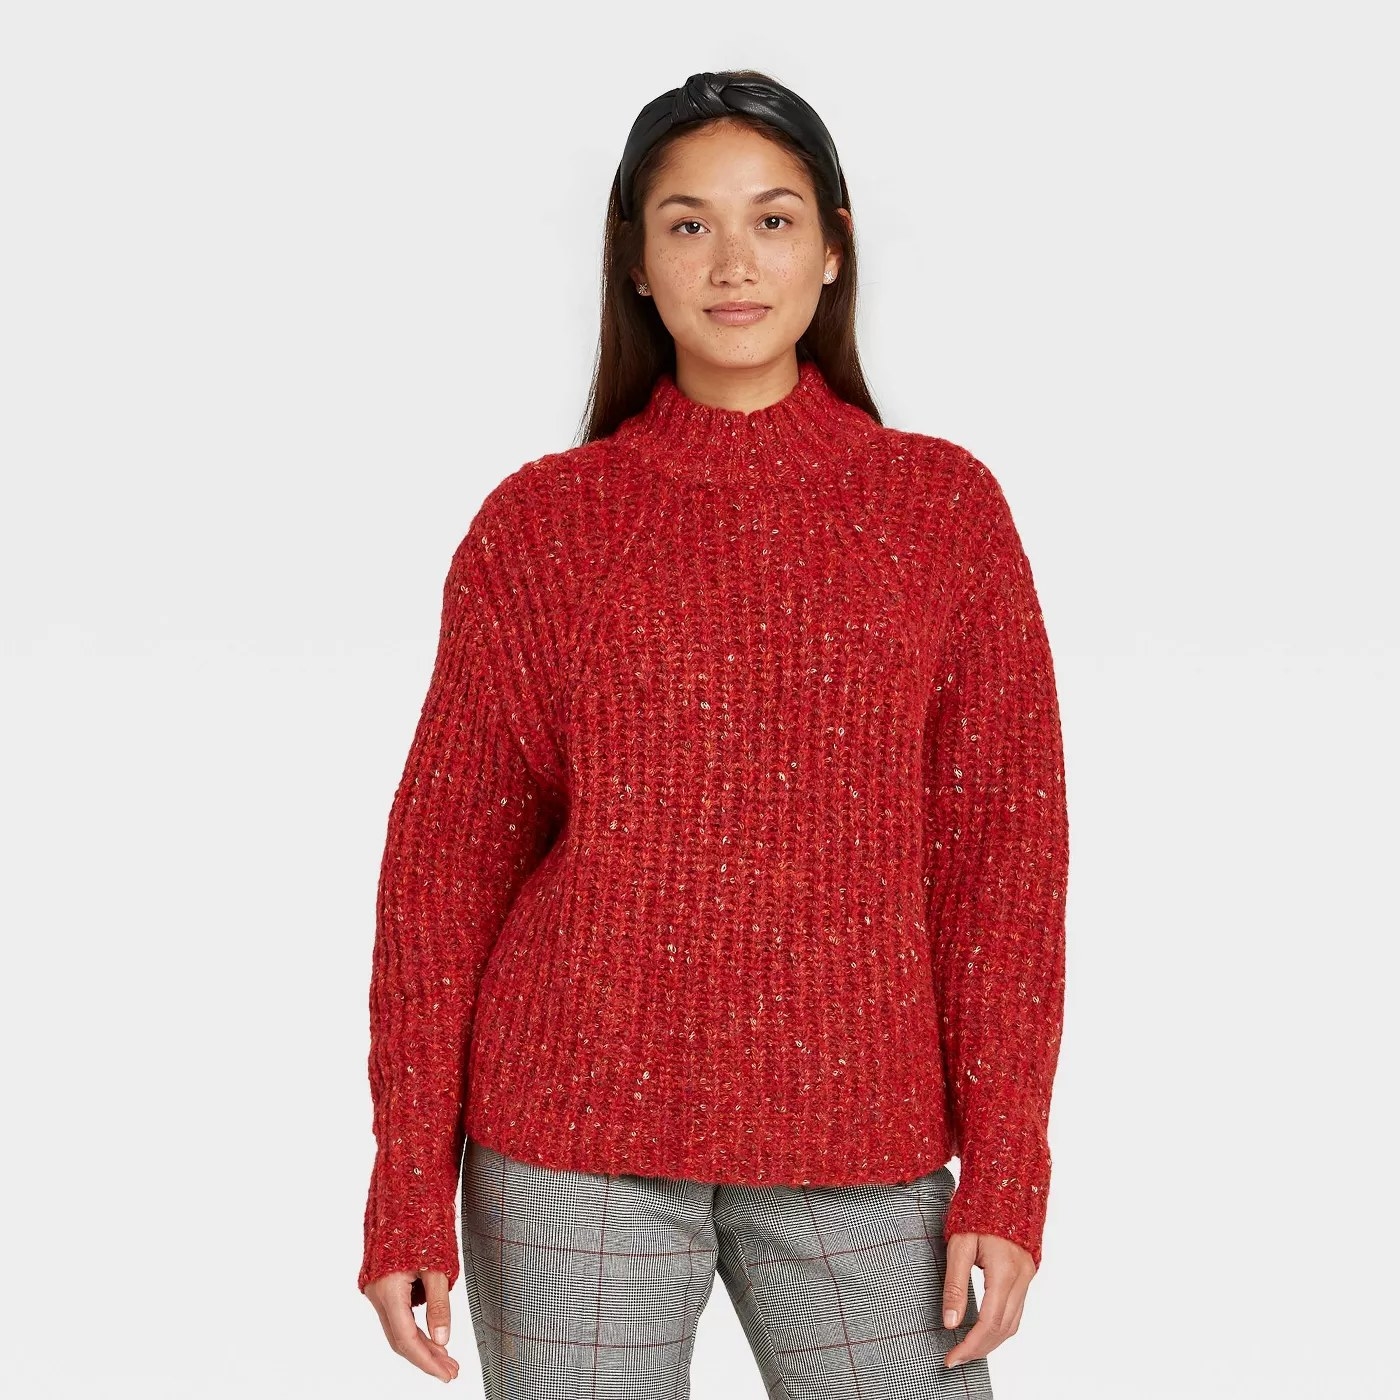 The mock turtleneck pullover sweater in red